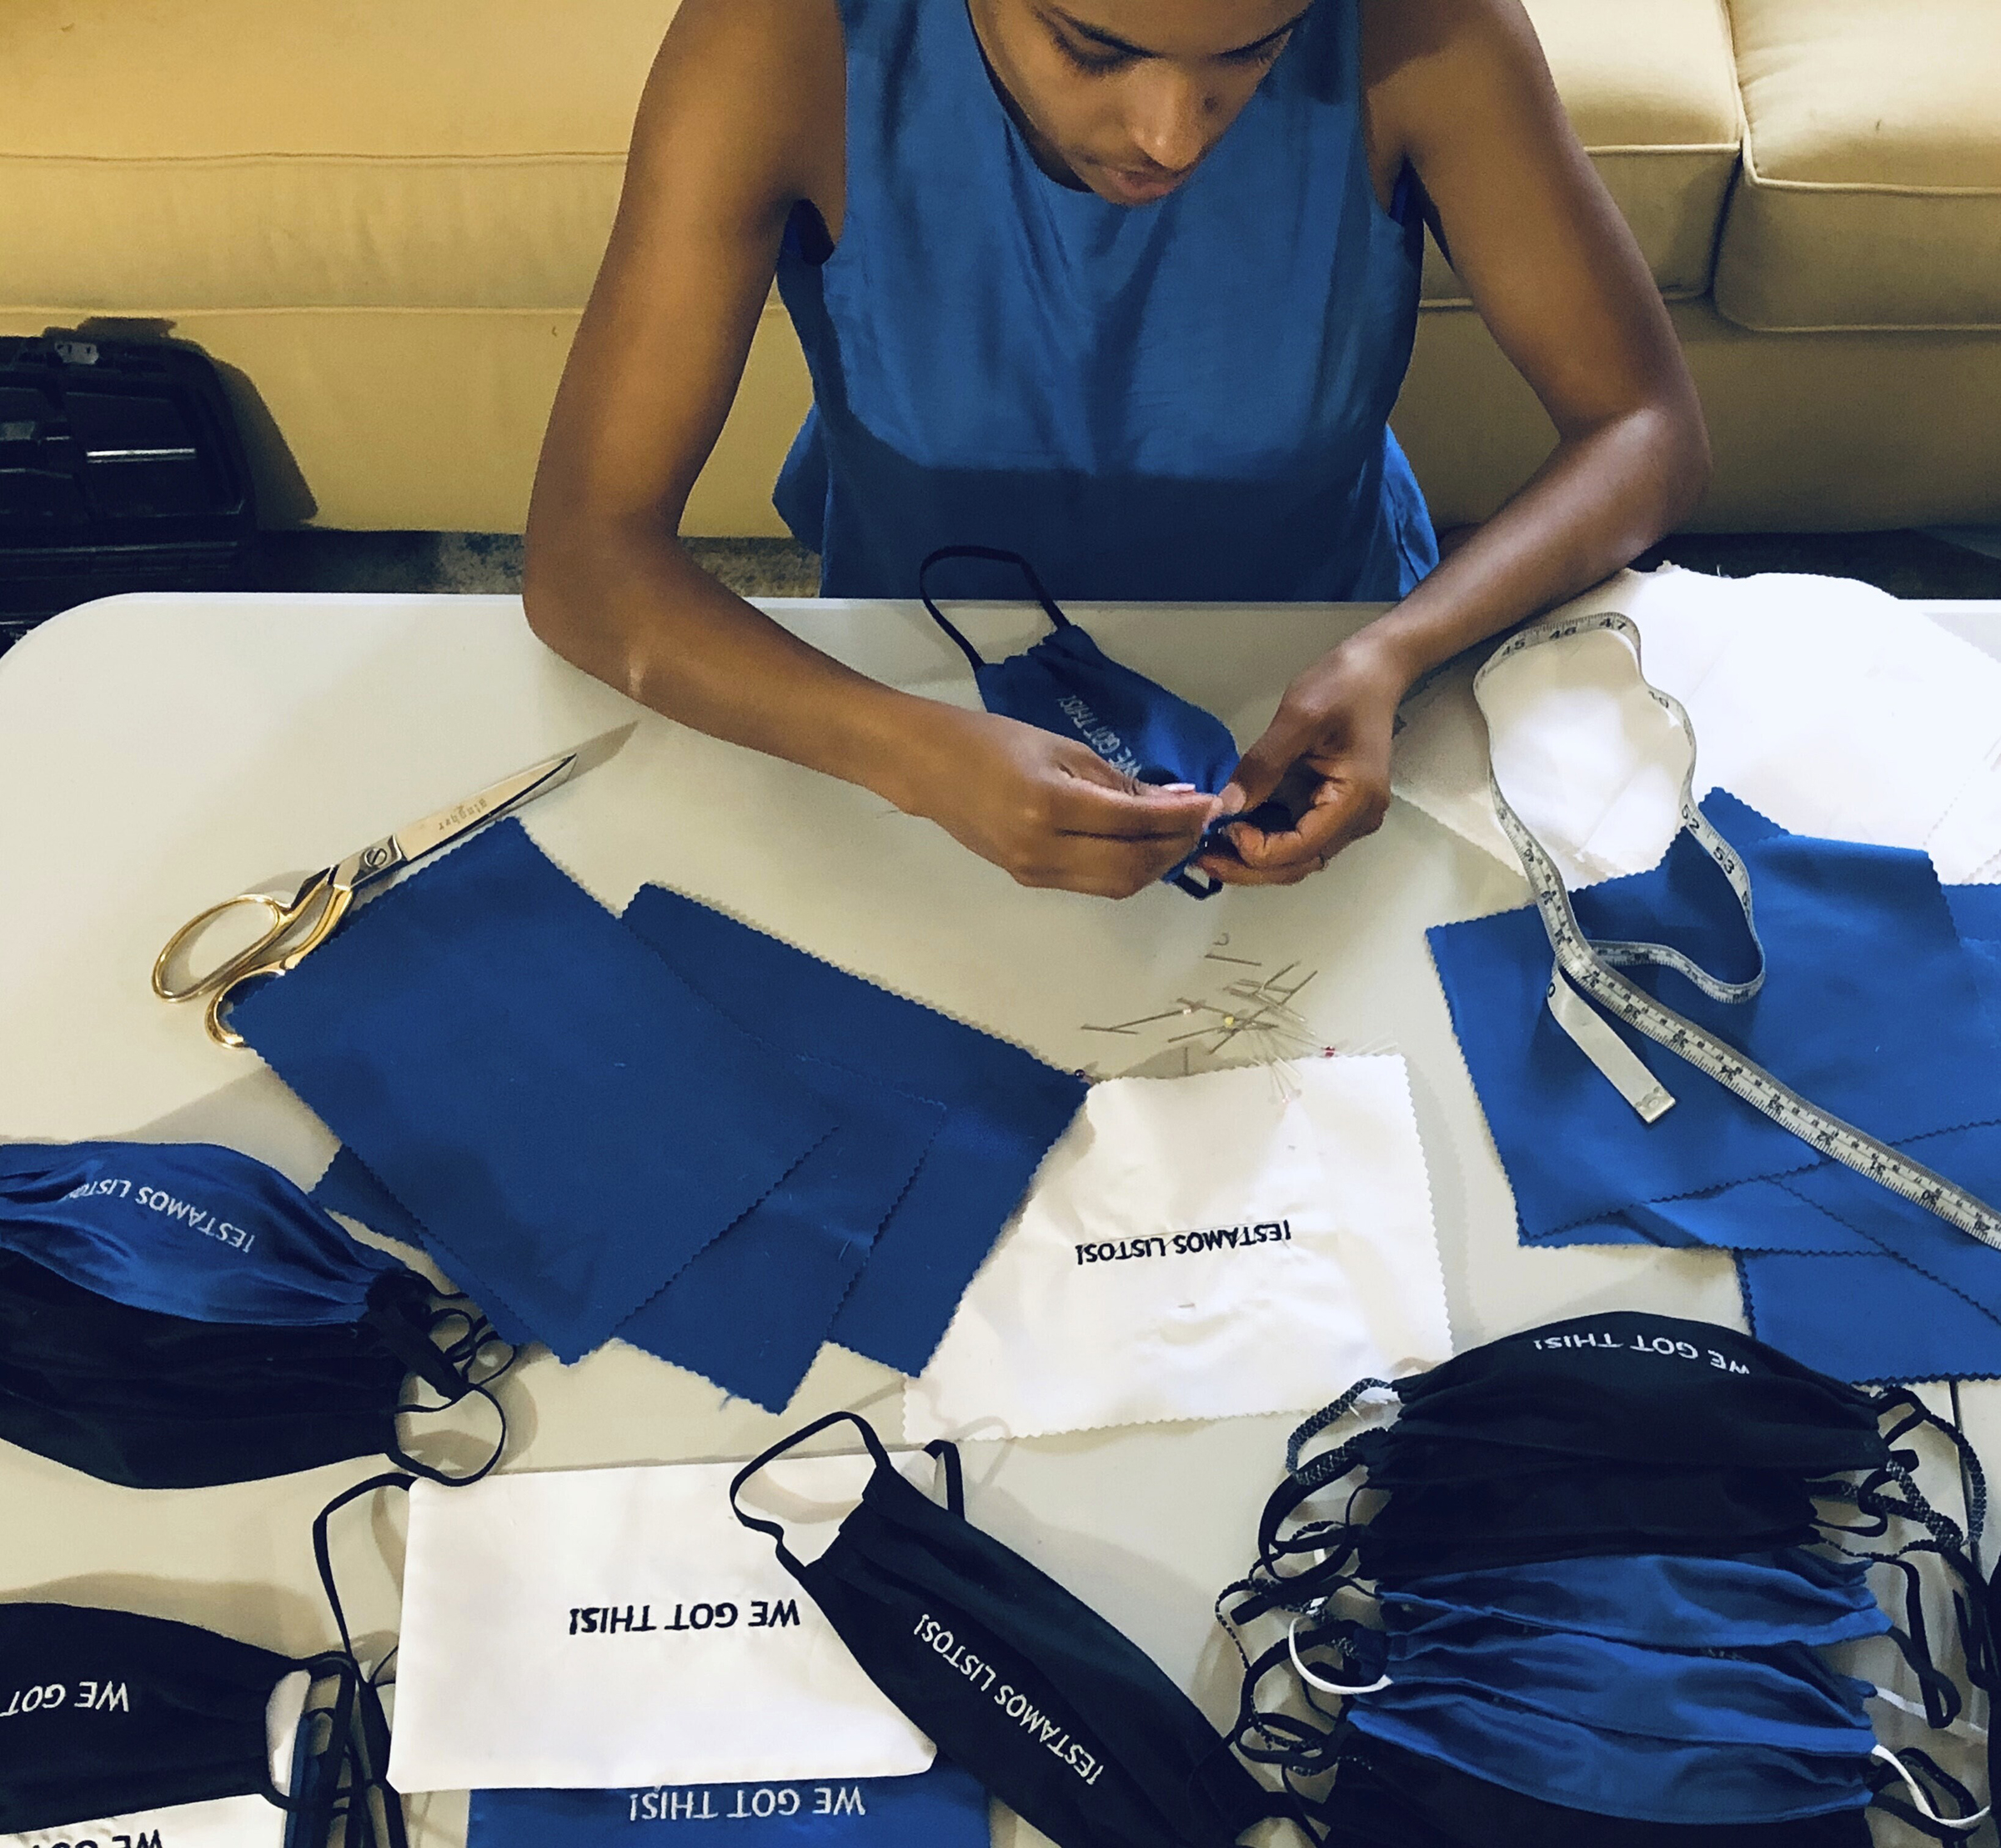 Briana Danyele sews cloth face masks that say "We Got This!" in her mother's living room which will be sent to health care workers in Greer, S.C., on March 22, 2020 (Christina Hunter via AP)